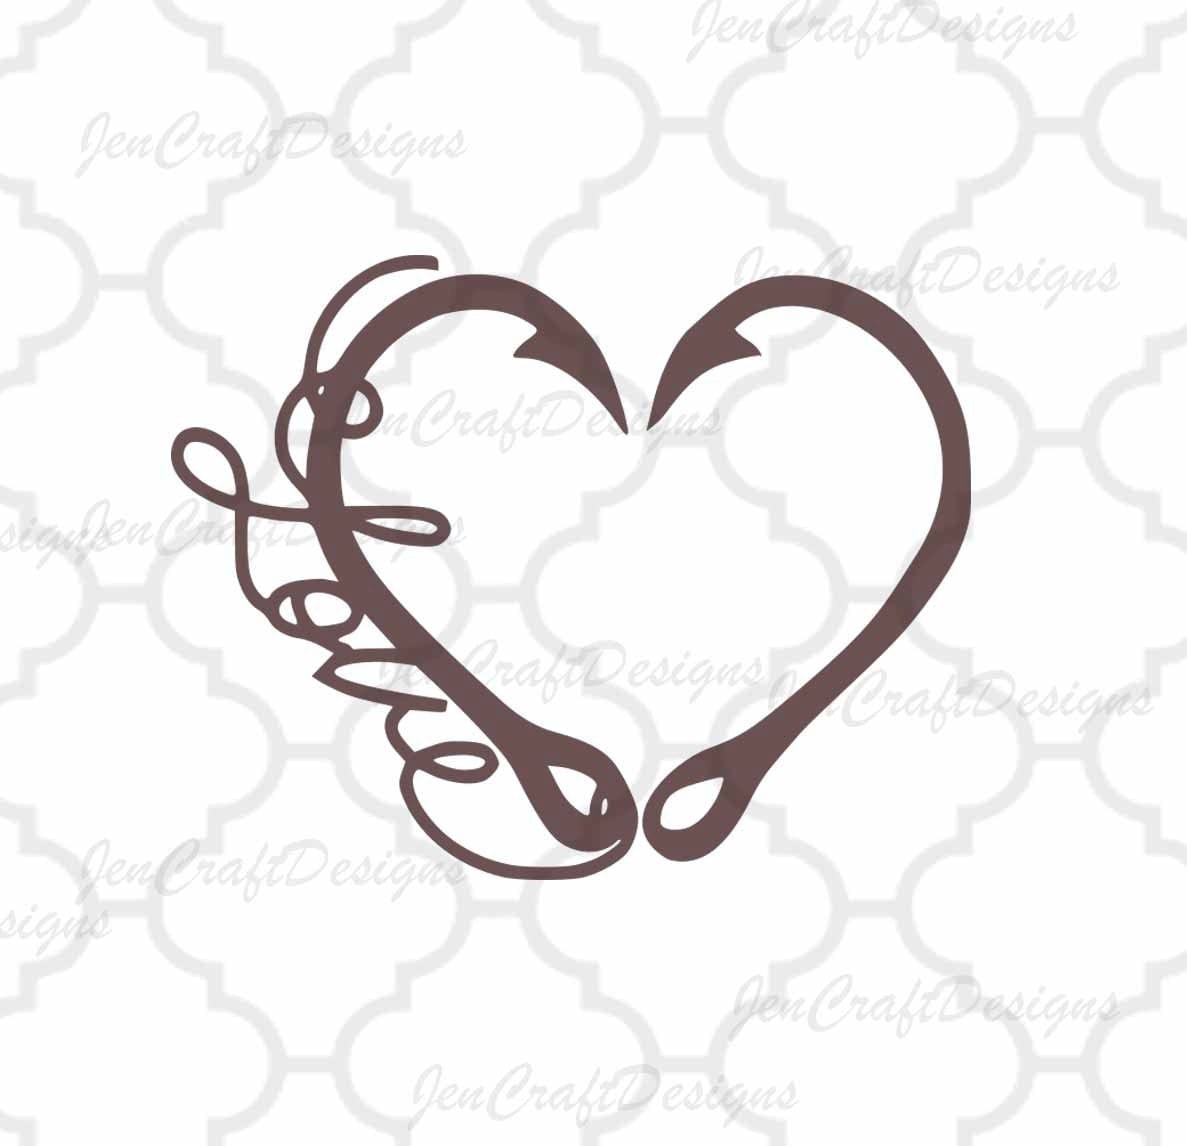 Download Interlocking Hook svg Heart Love Cutting File Set in Svg, eps, dxf and PNG Format for Cricut and ...